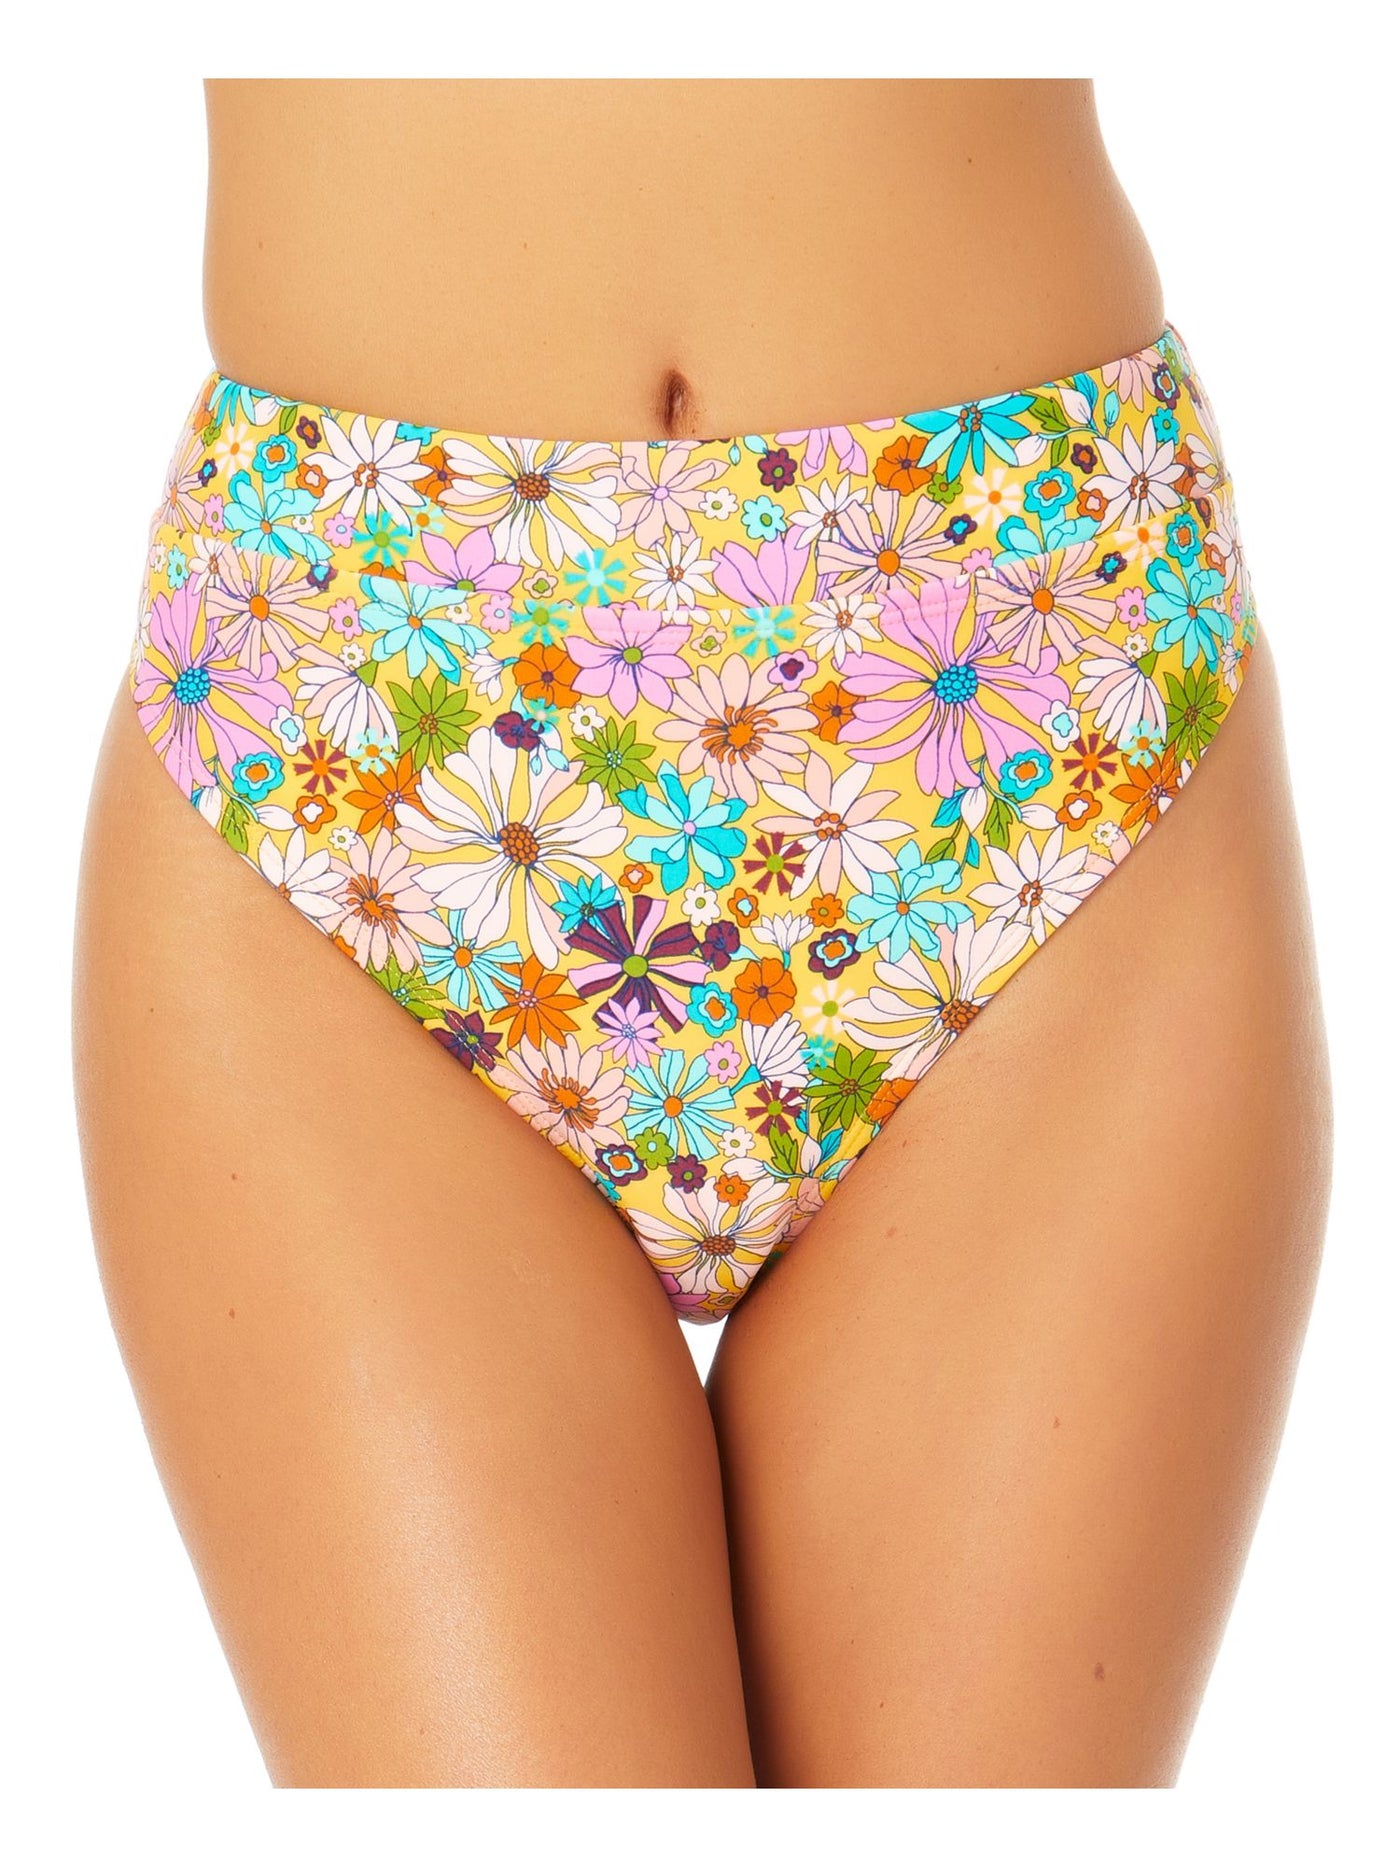 CALIFORNIA SUNSHINE Women's Multi Color Floral Stretch Banded High-Leg Lined Bikini Moderate Coverage High Waisted Swimsuit Bottom XL